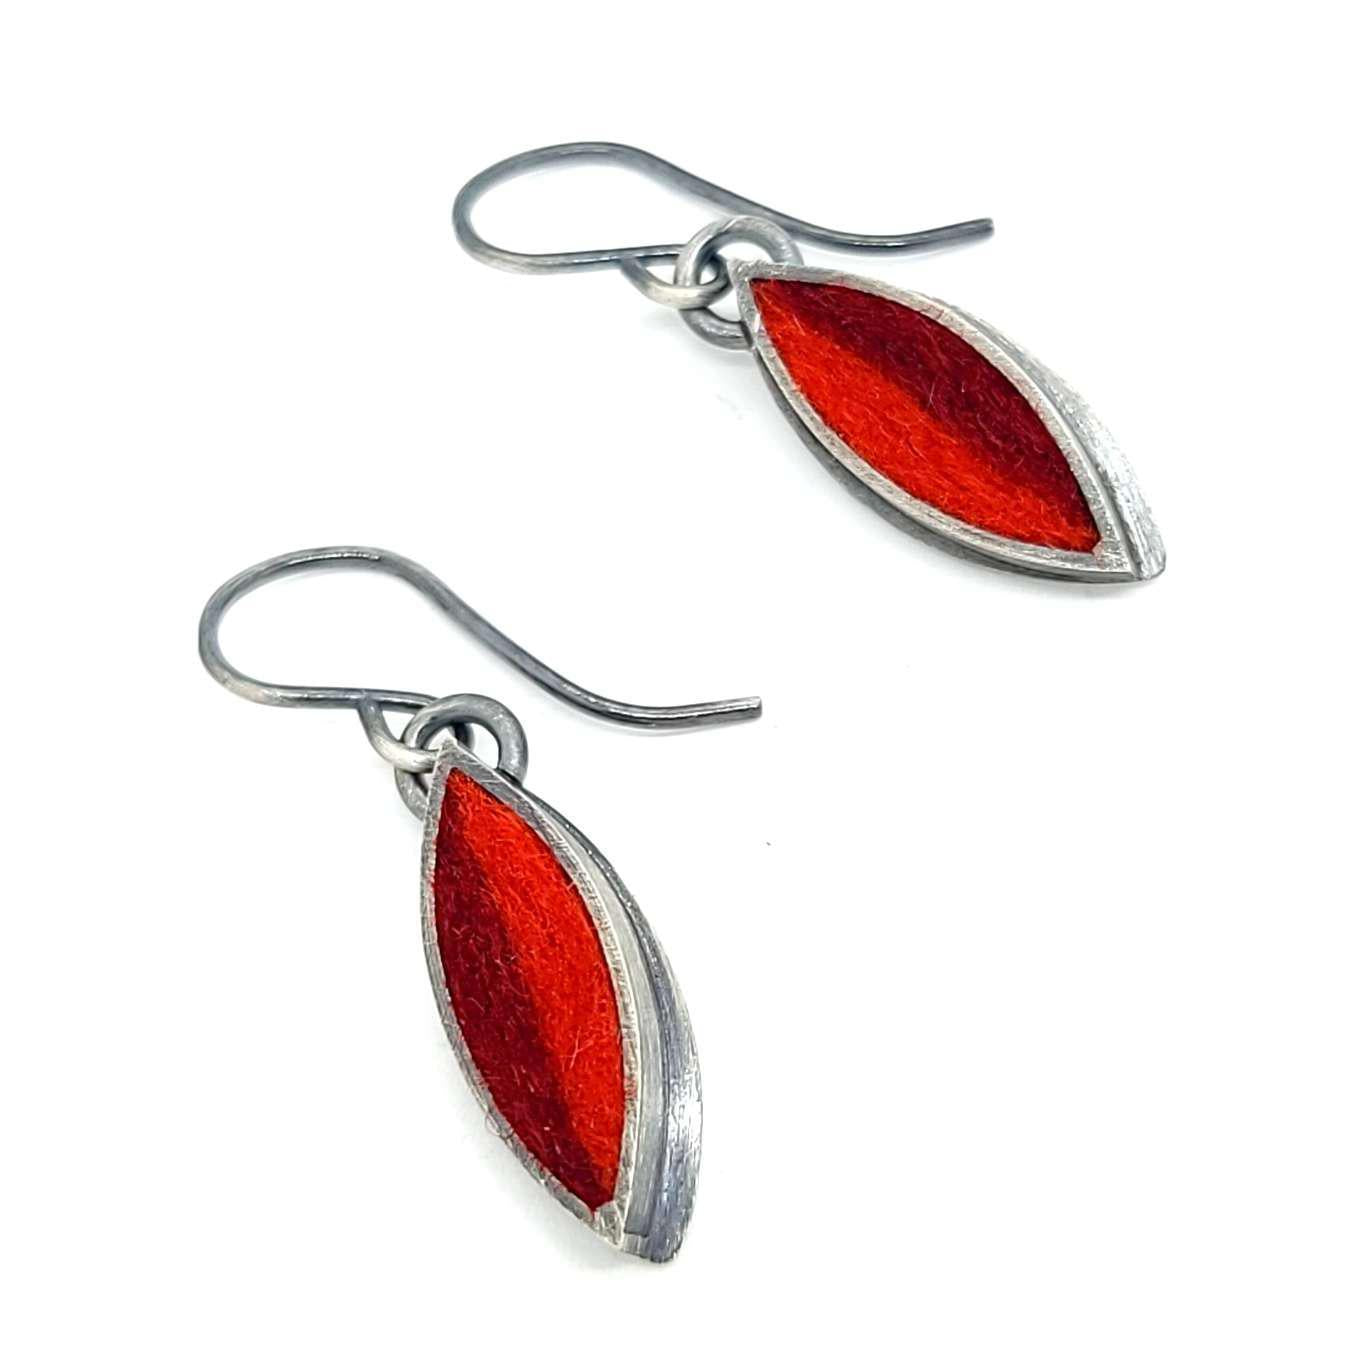 Earrings - Small Single Leaf Drops in Cranberry and Persimmon by Michele A. Friedman